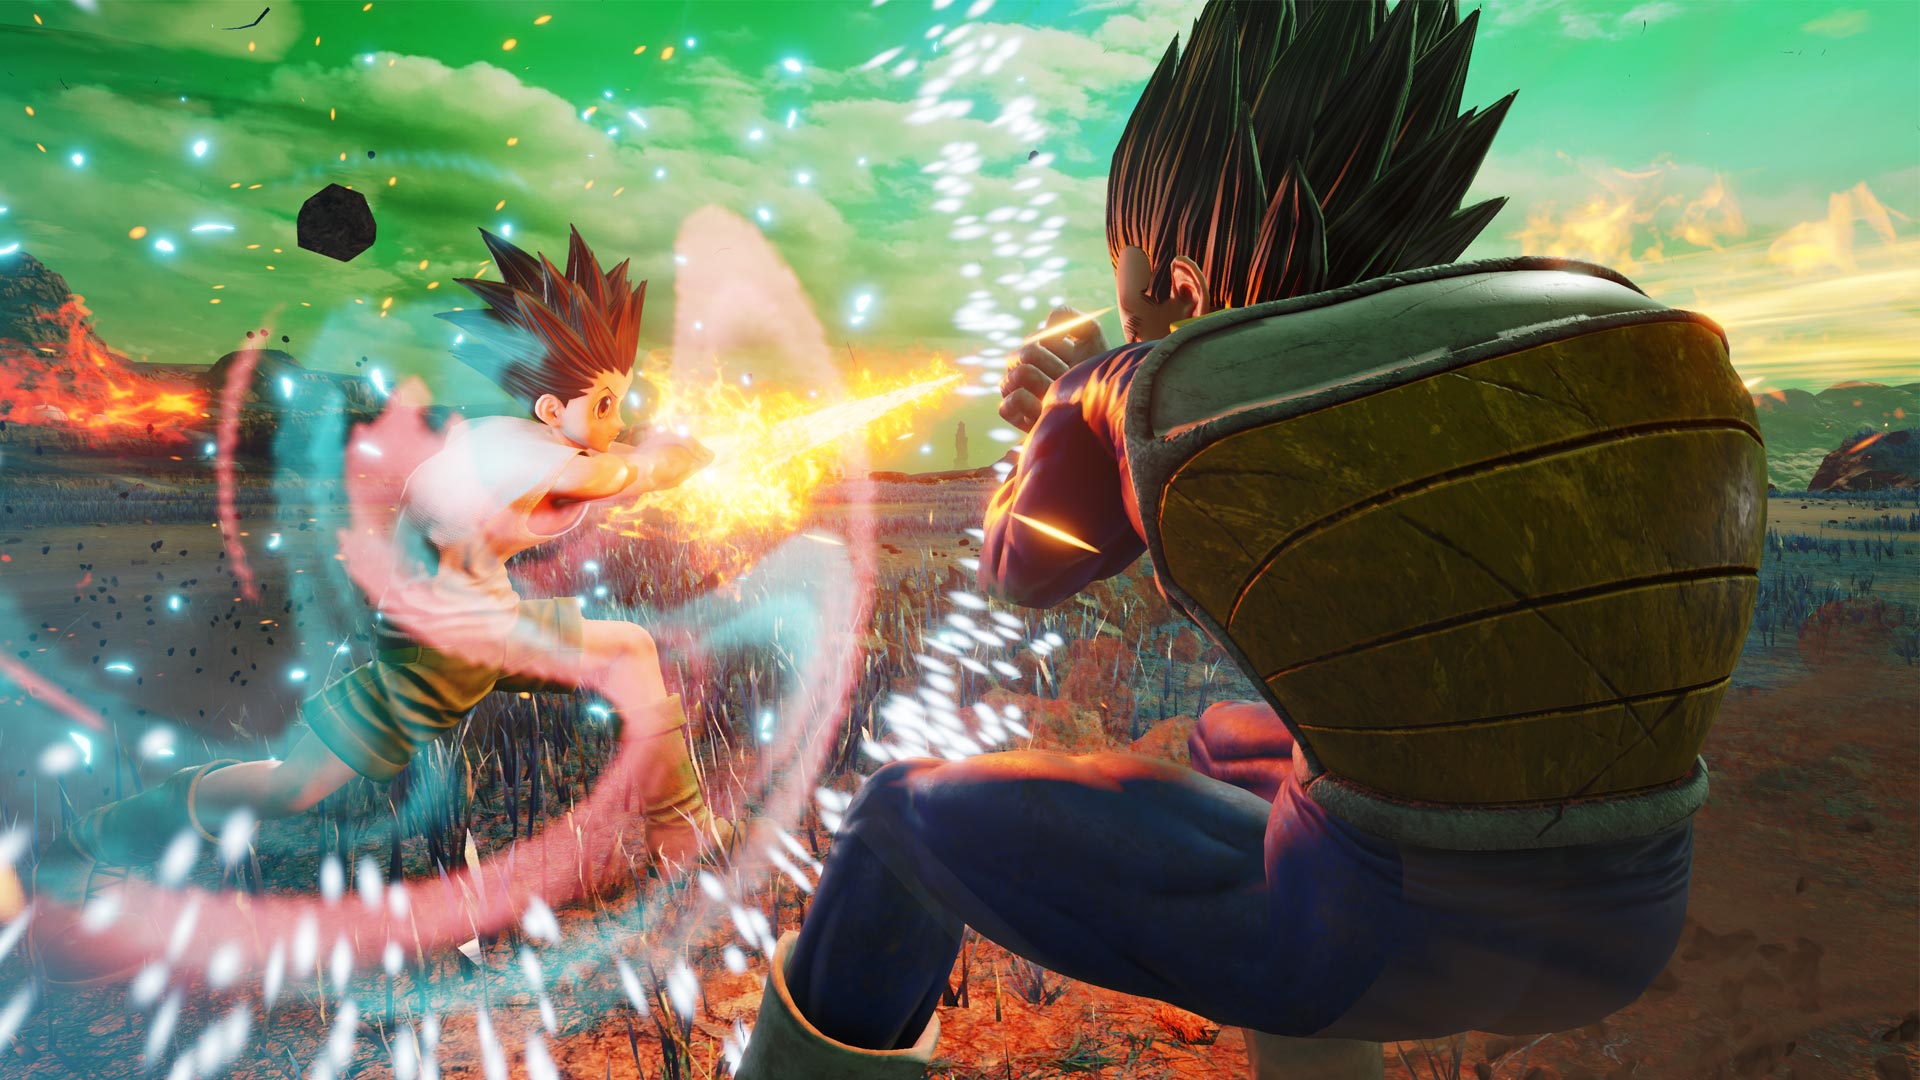 jump force price playstation store